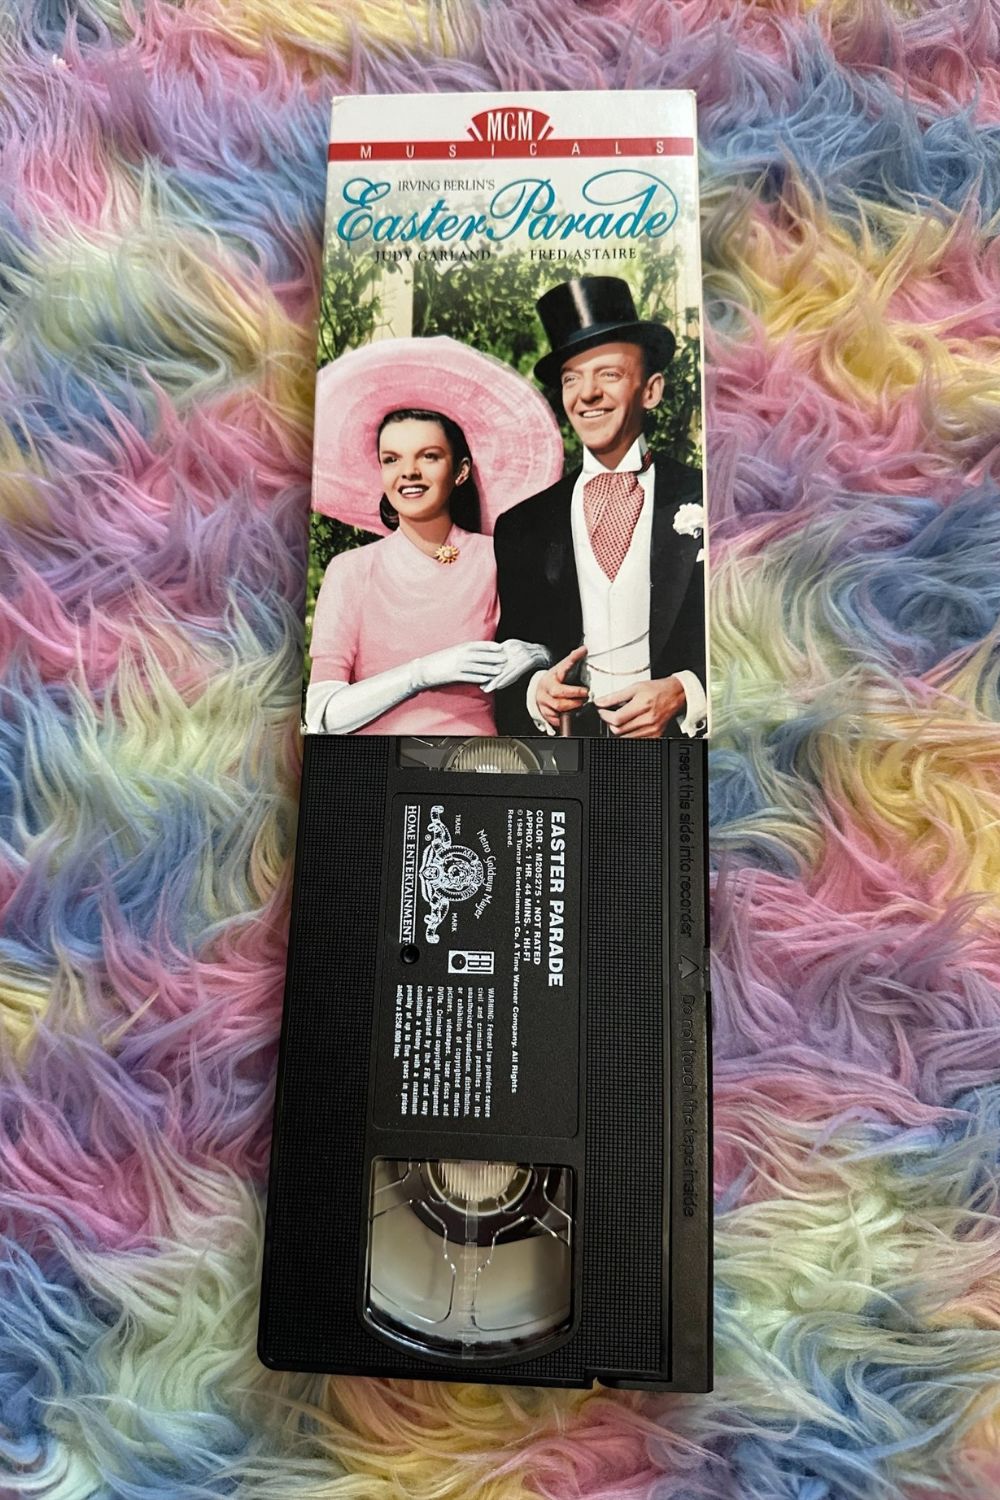 EASTER PARADE VHS*